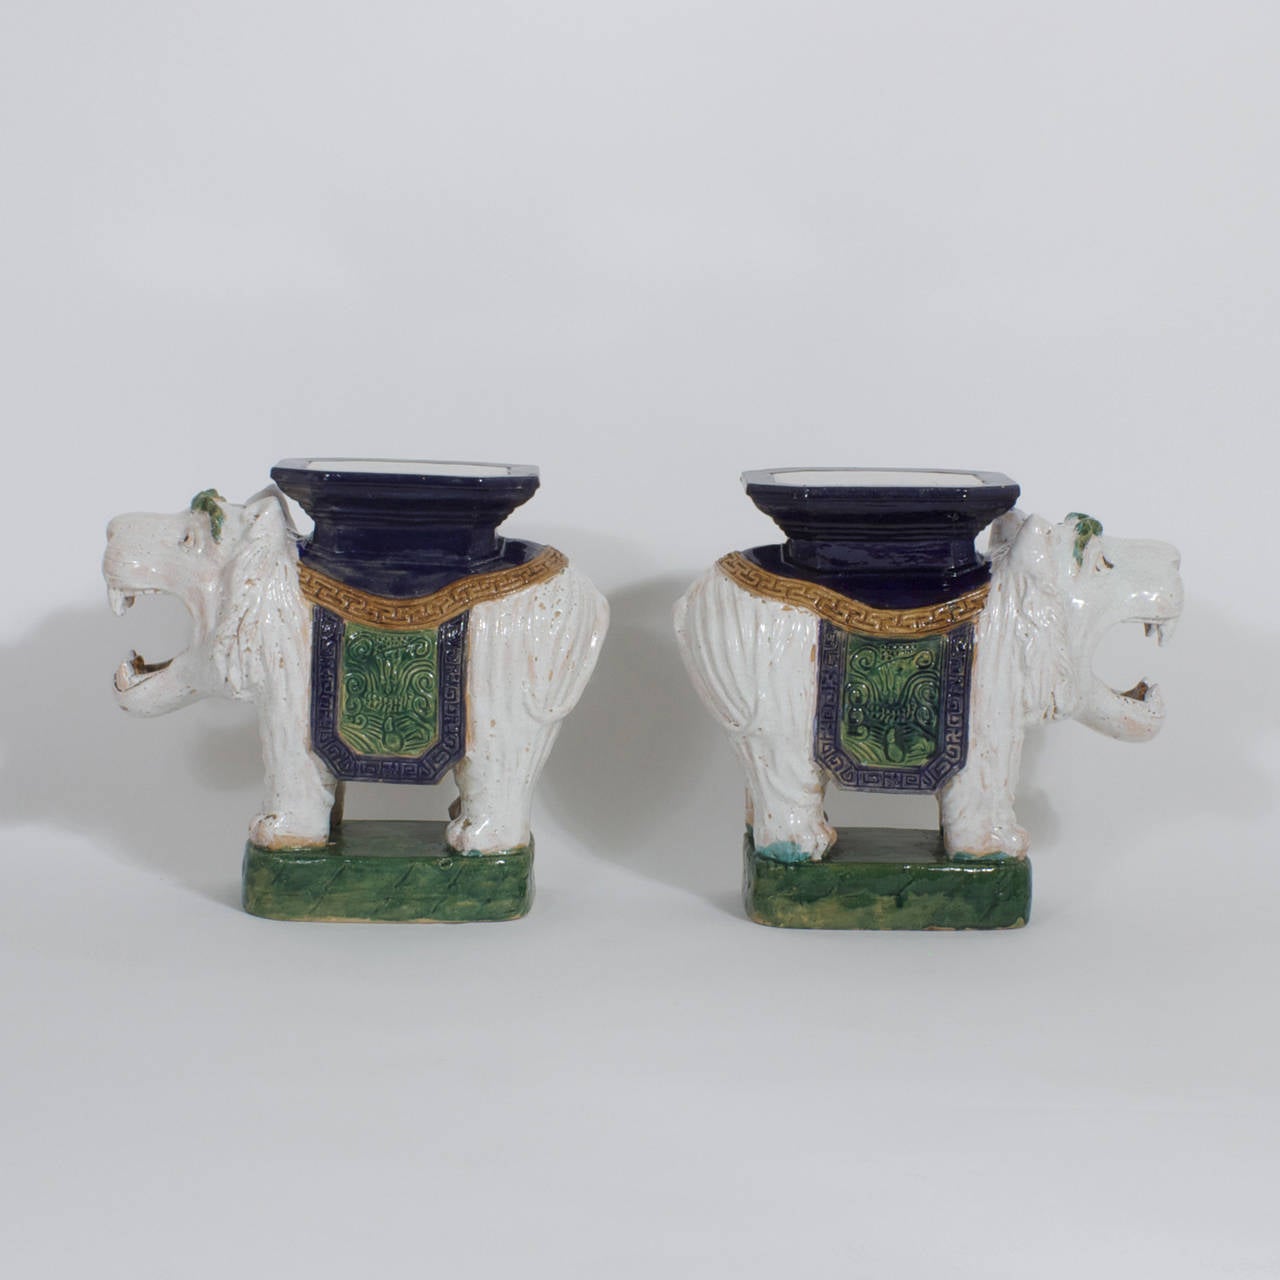 Whimsical pair of roaring lion tables or garden seats made of terra cotta then painted and glazed in white, green, blue and brown. These comical cats have been trained to work and wear saddles with pedestals. Perfect use for drink stands, plant